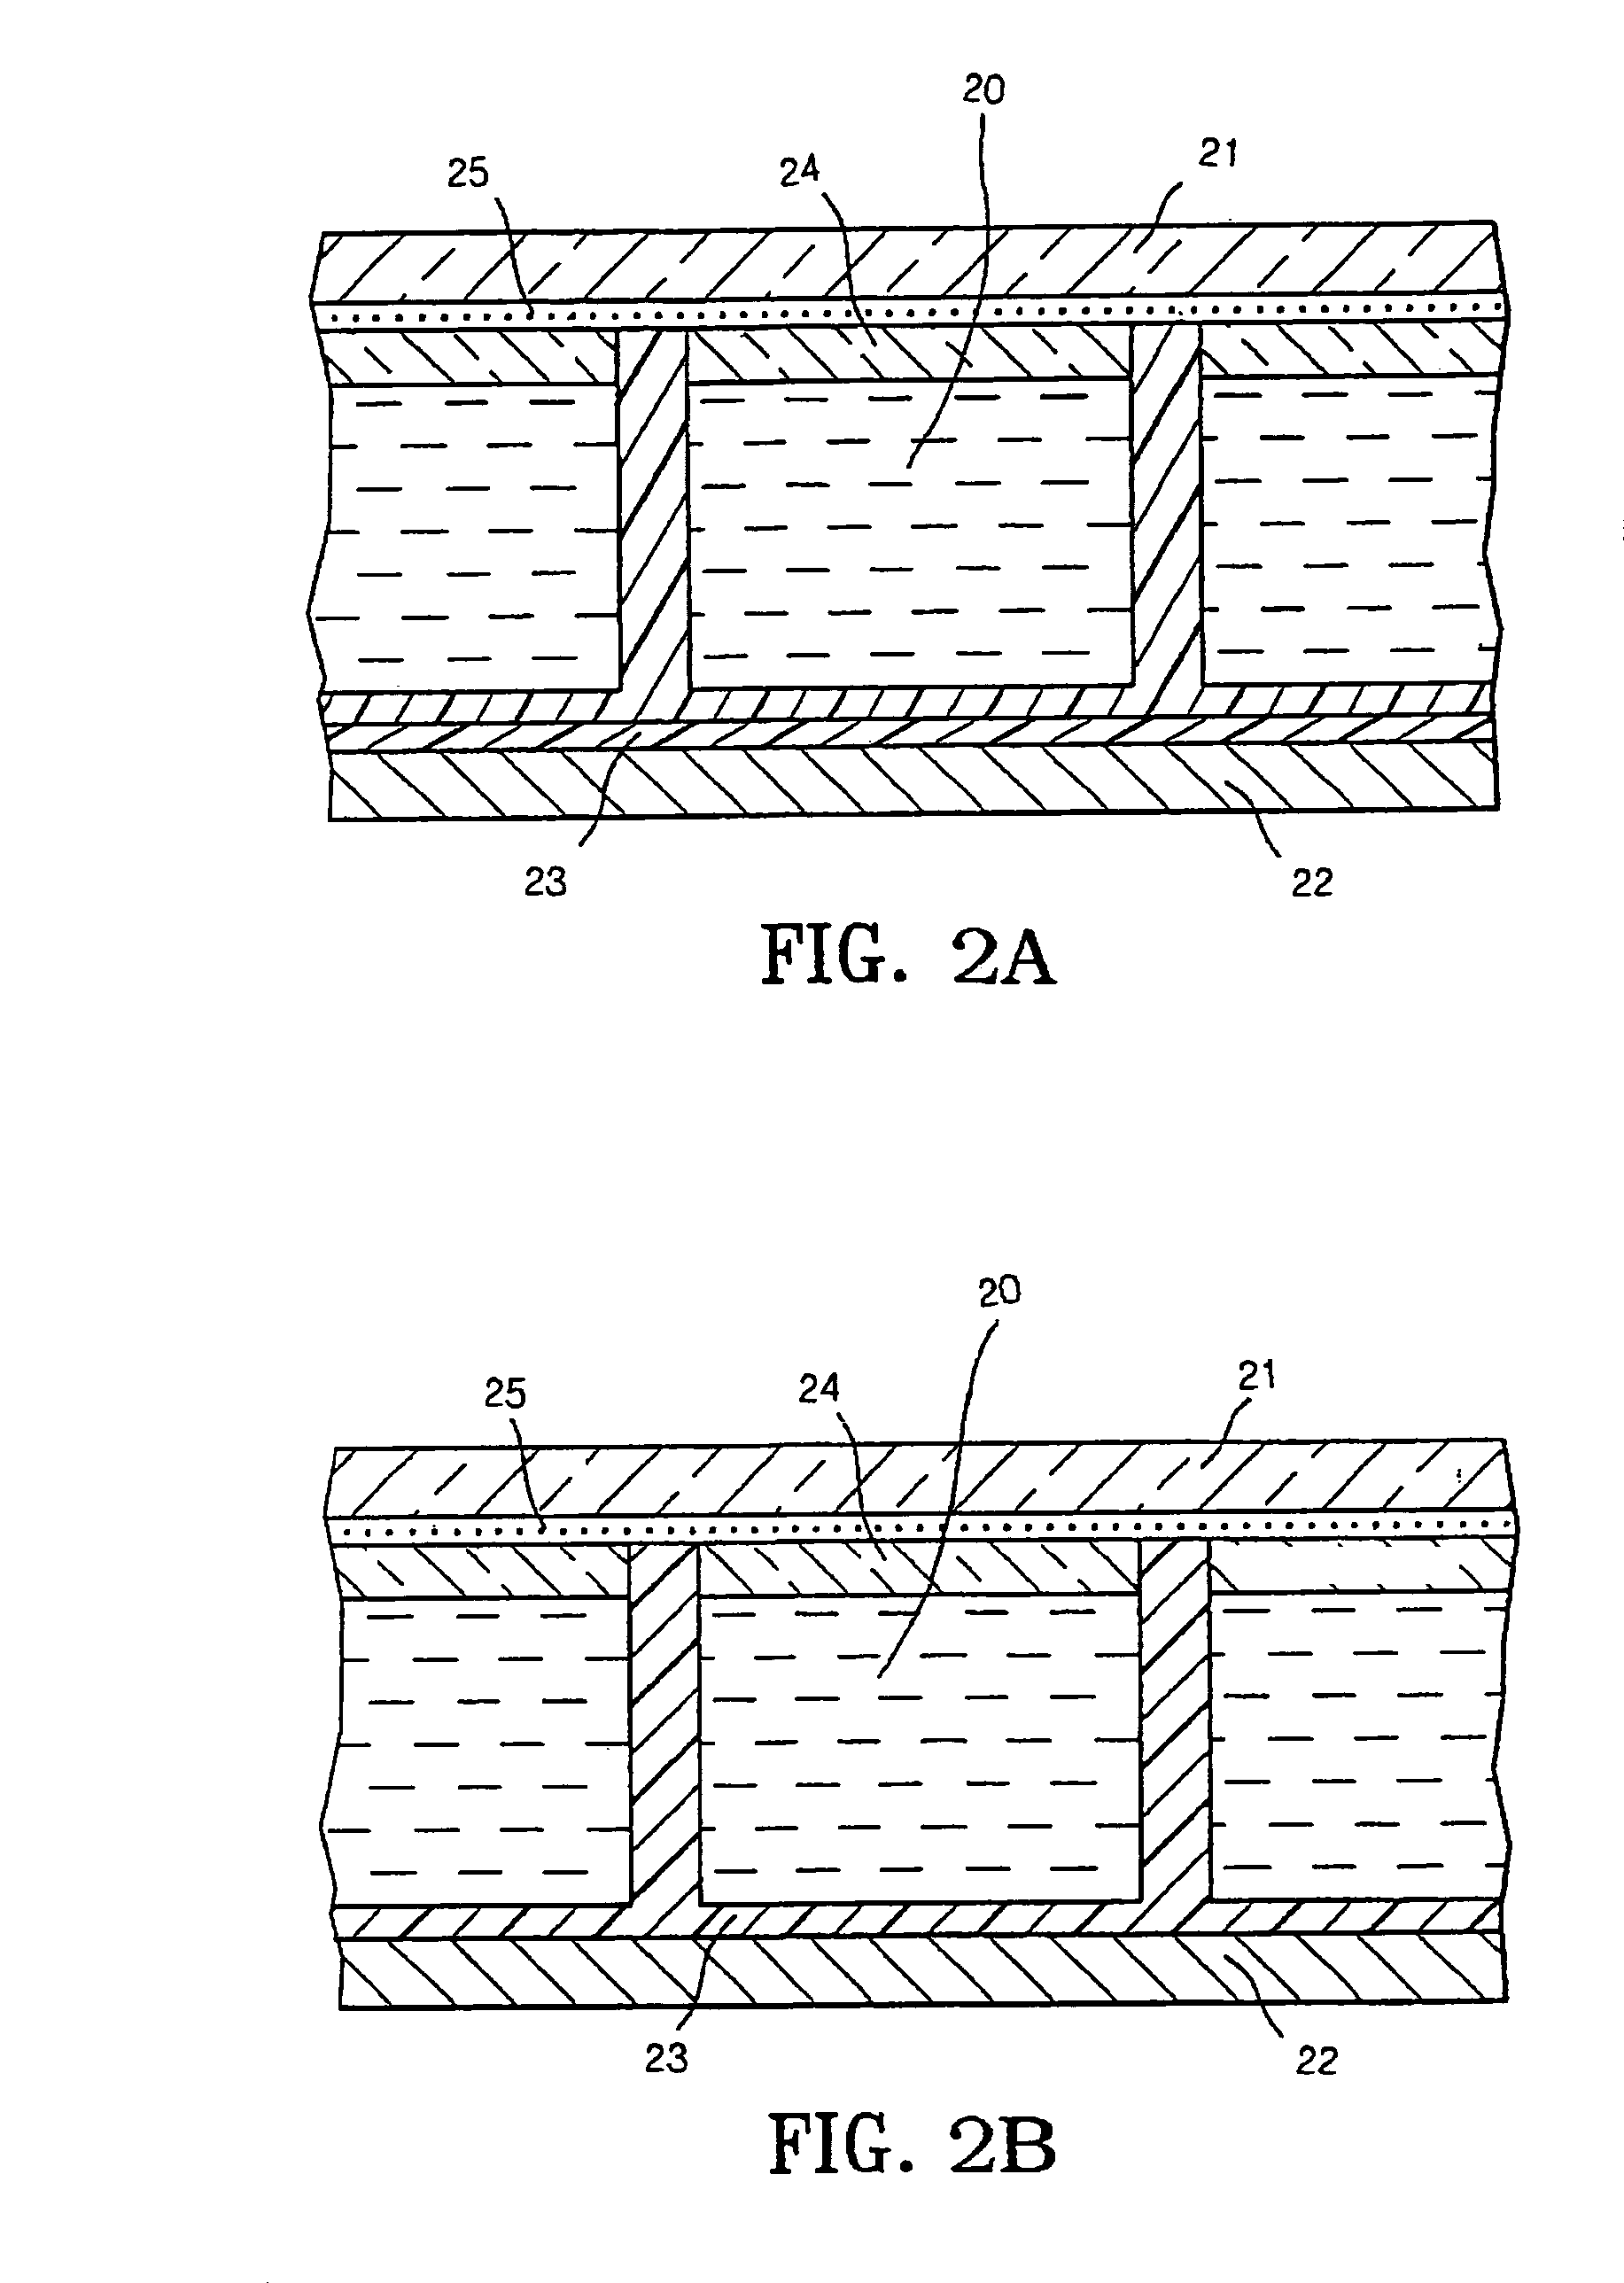 Display cell structure and electrode protecting layer compositions